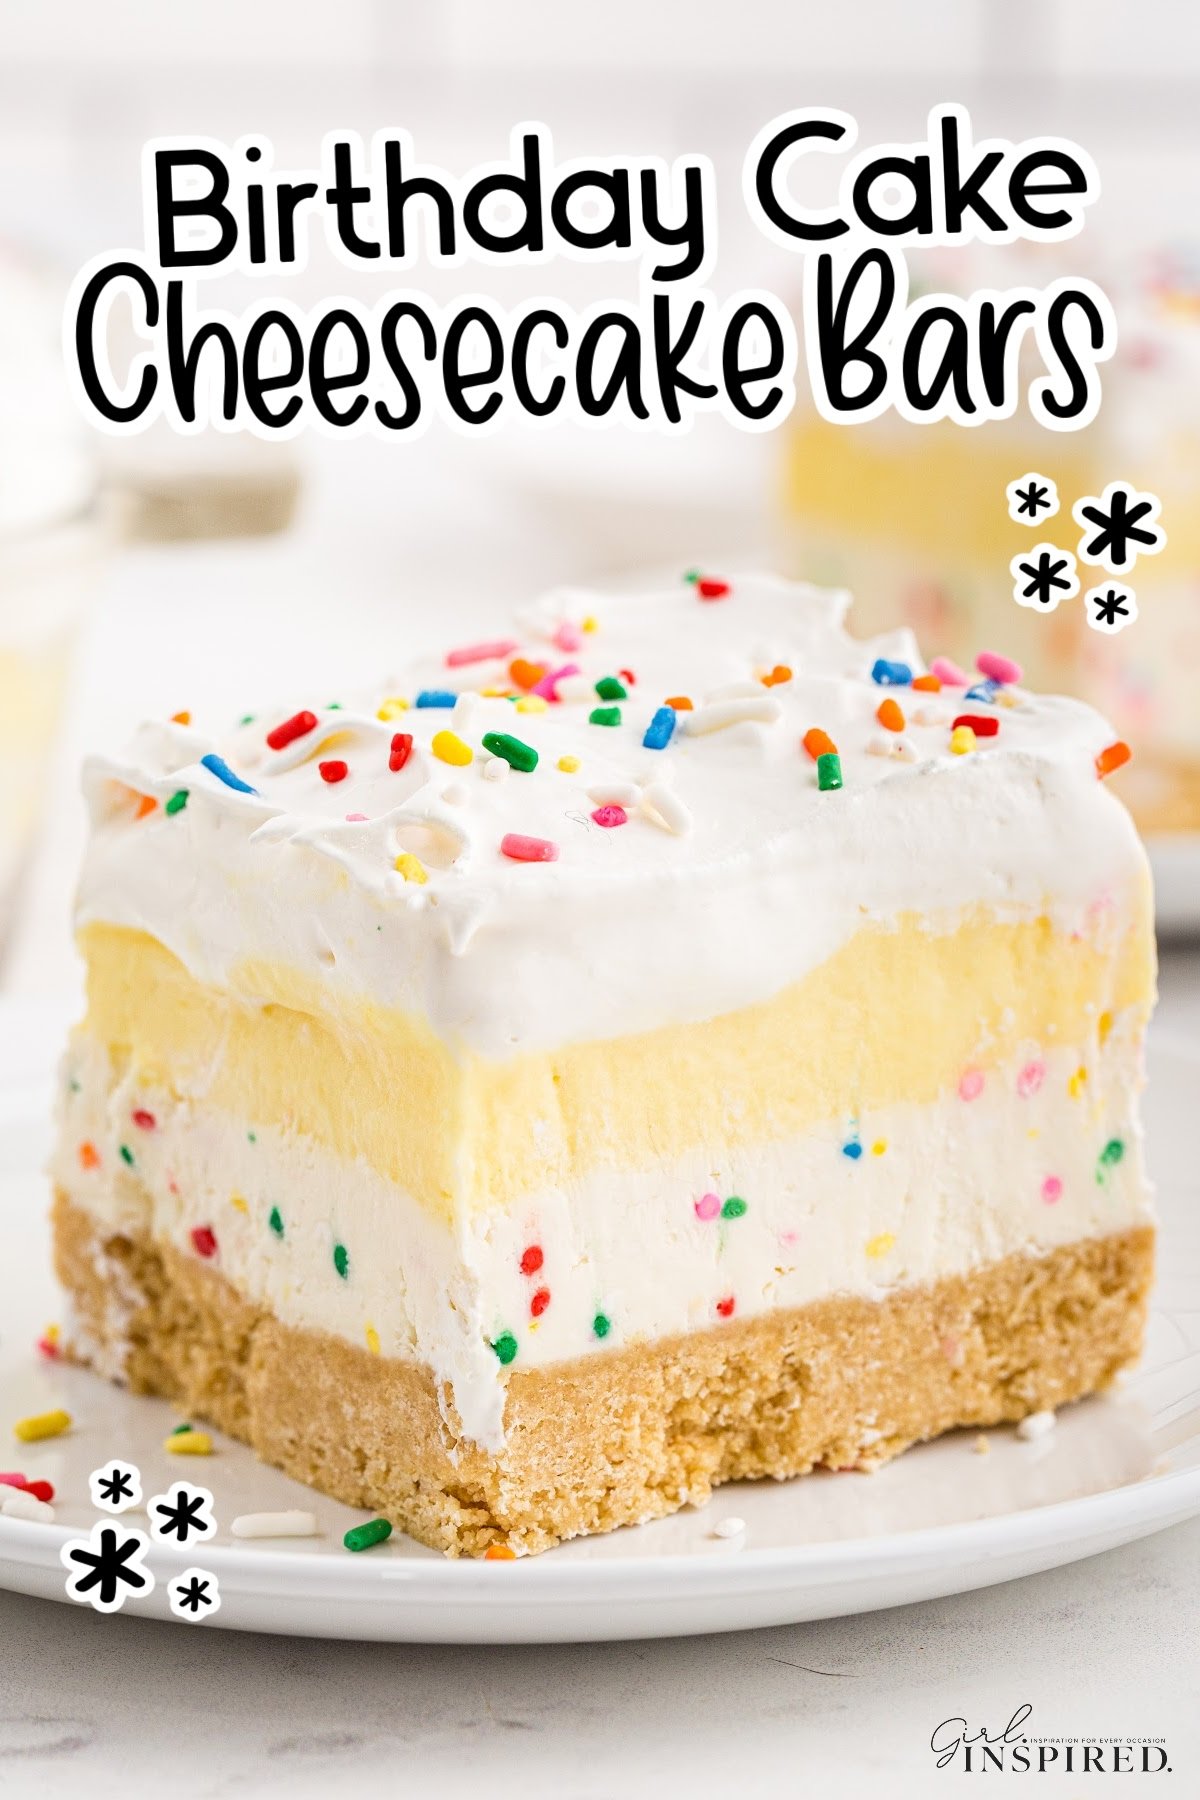 Slice of Birthday Cake Cheesecake bars showing the layers, with text overlay.